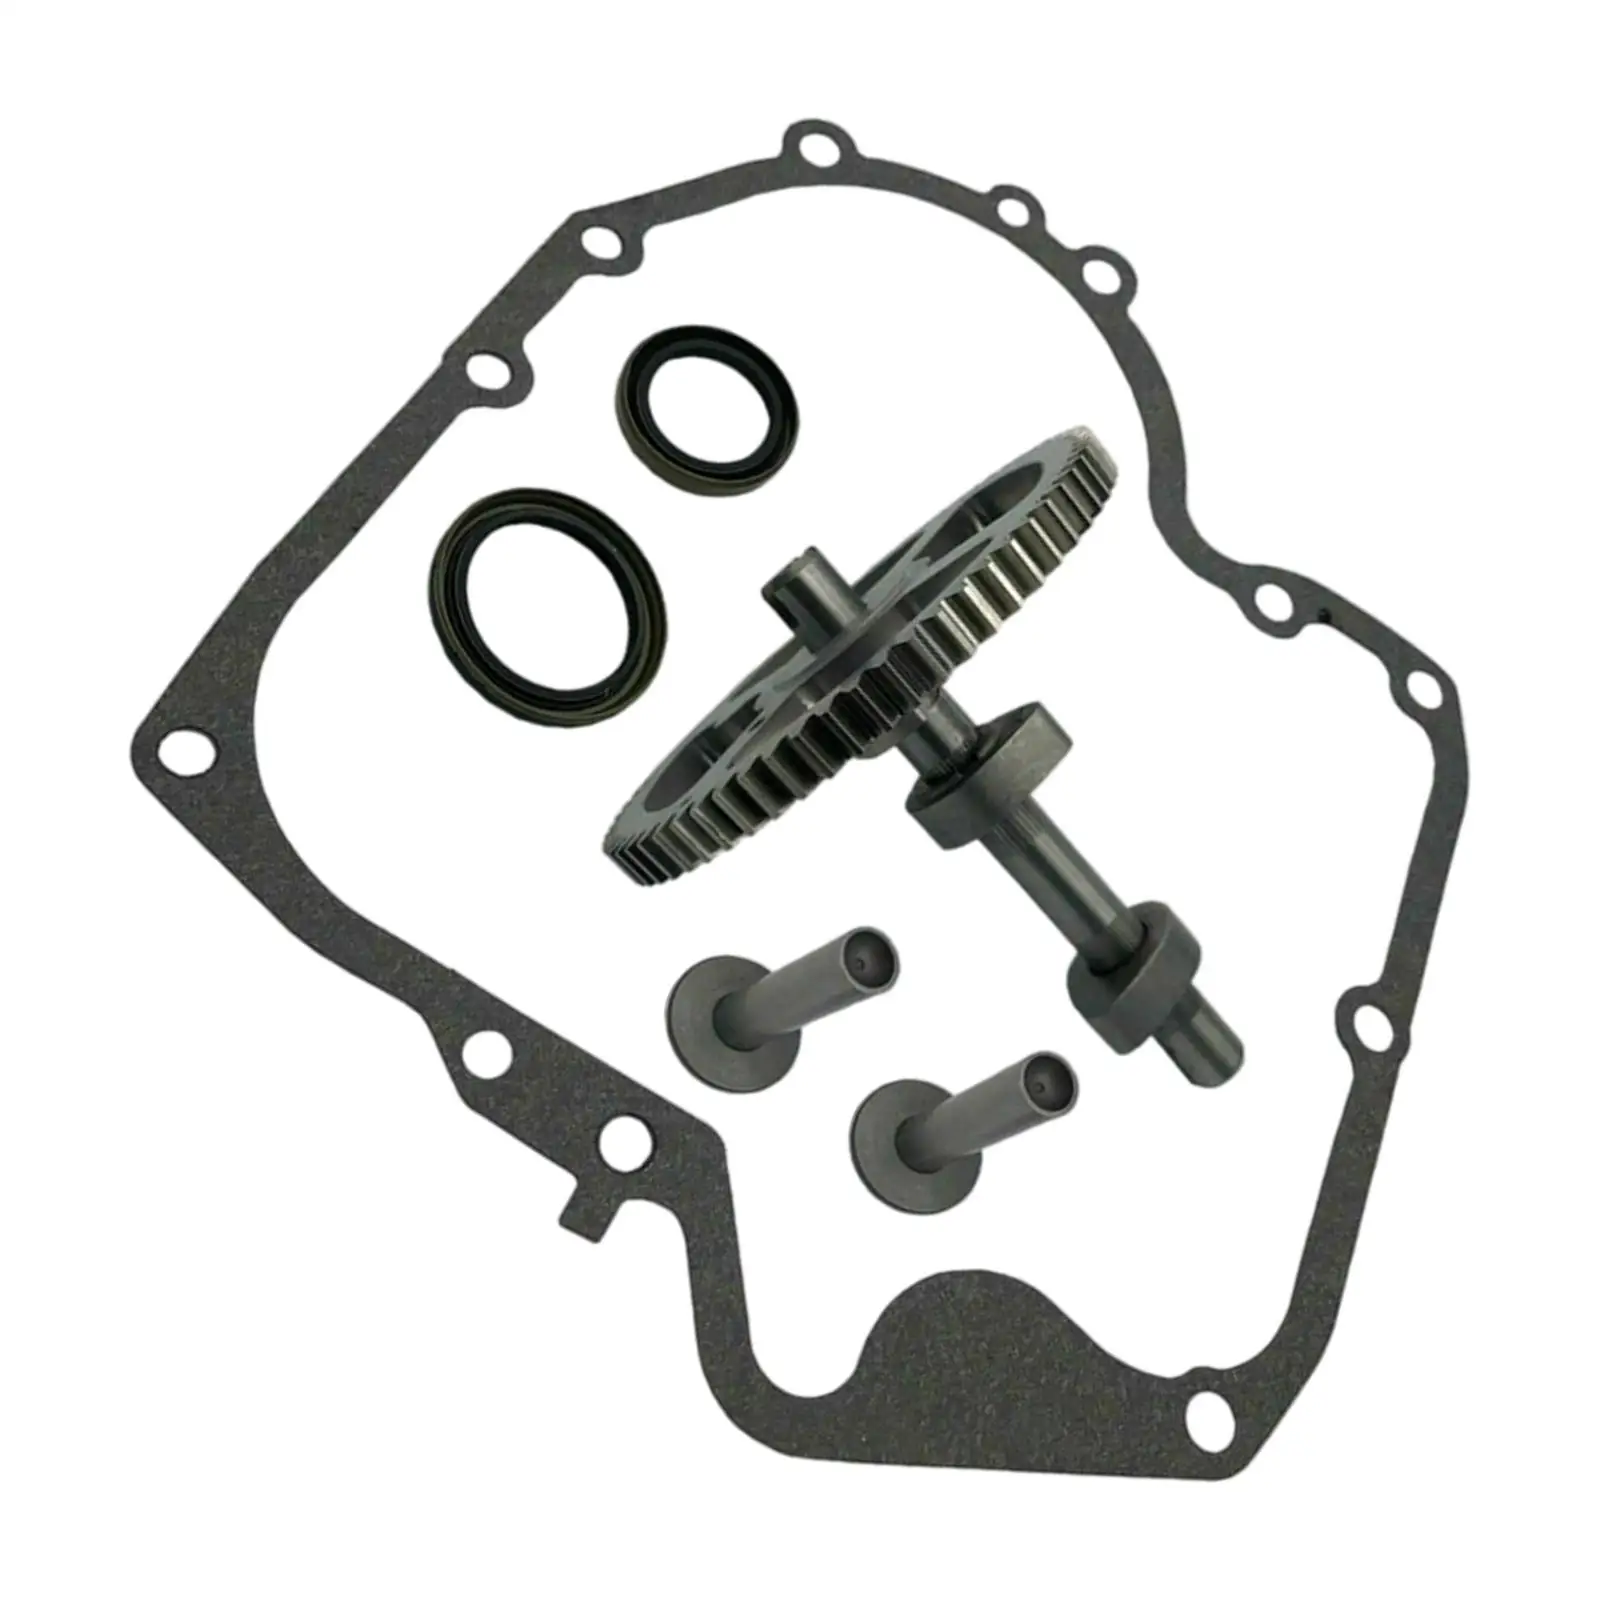 793880 Sump Camshaft Kit with 697110 Gasket Replacement for 793893583 792681 791942 795102 Oil  Connecting Rods